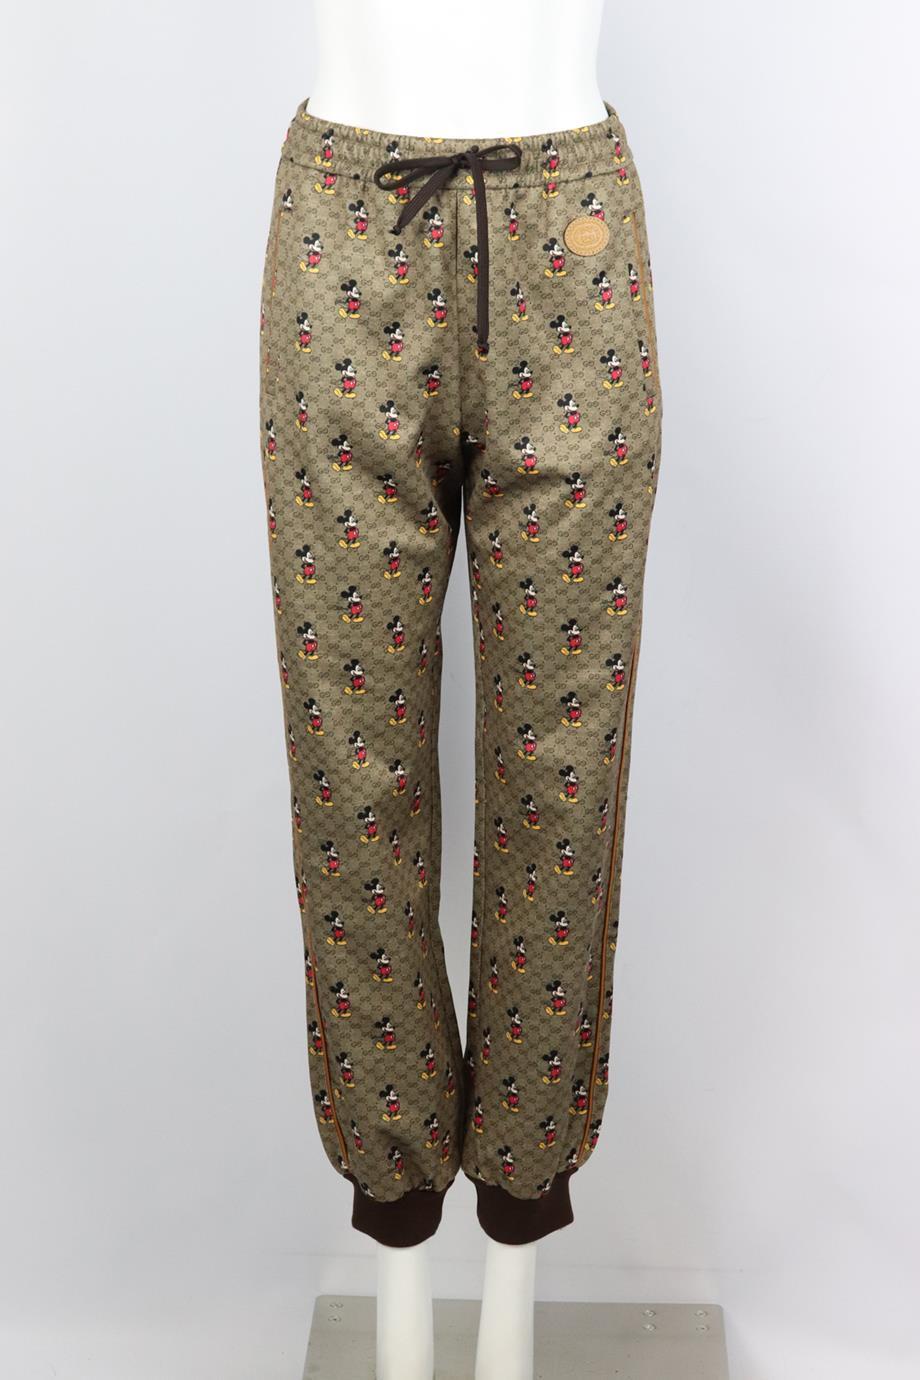 Gucci + Disney gg print tech jersey track pants. Brown. Pull on. 55% Polyester, 45% cotton; fabric2: 72% polyester, 25% polyamide, 3% elastane. Size: Small (UK 8, US 4, FR 36, IT 40). Waist: 27.5 in. Hips: 43.2 in. Length: 40.2 in. Inseam: 29.7 in.